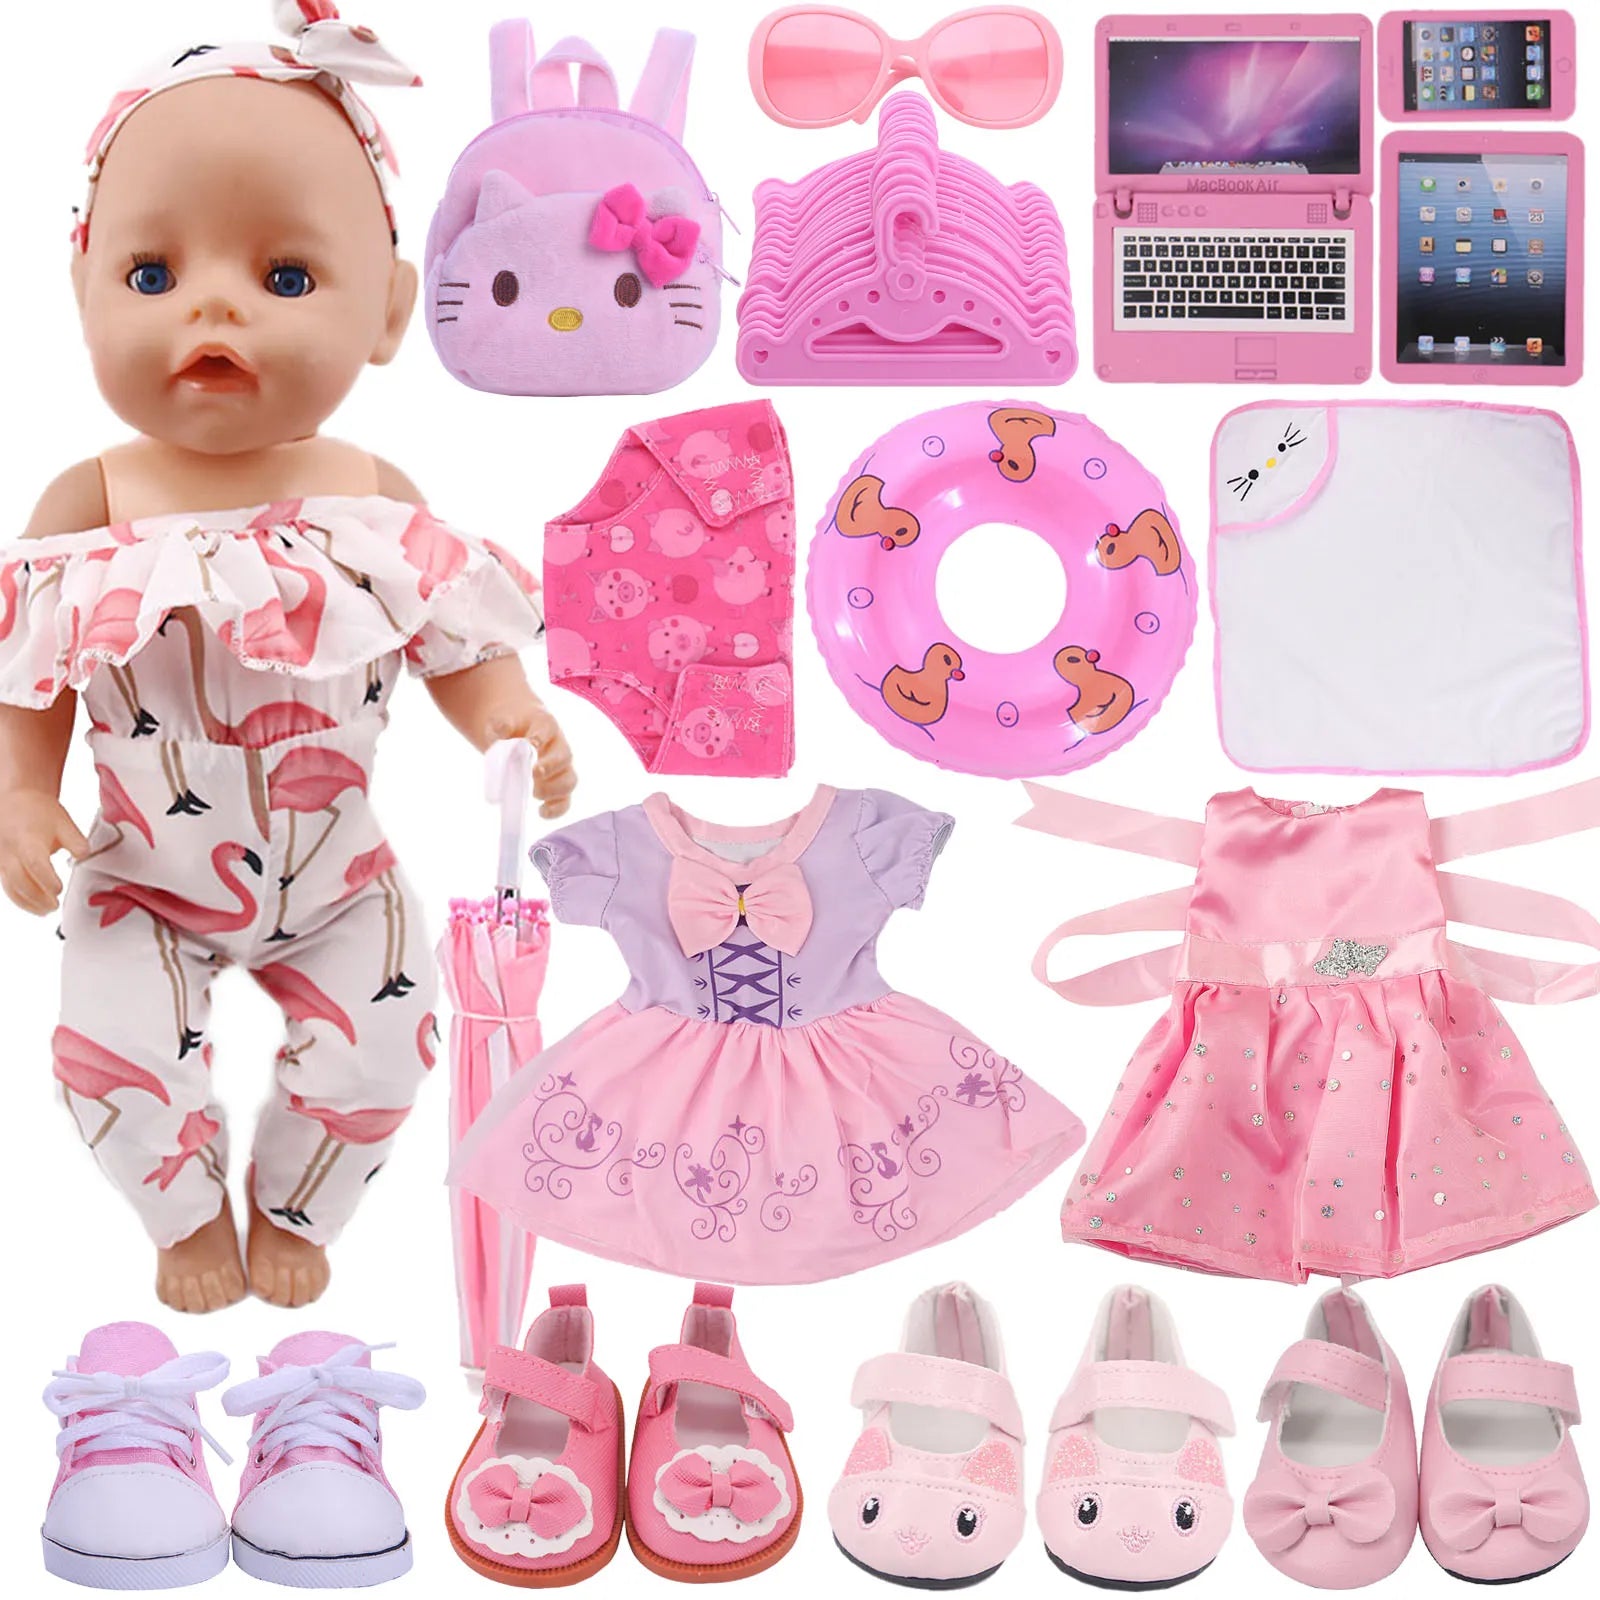 Flamingo Kittys Doll Clothes Set for 18 Inch Dolls: Cute & Trendy Accessories  ourlum.com   